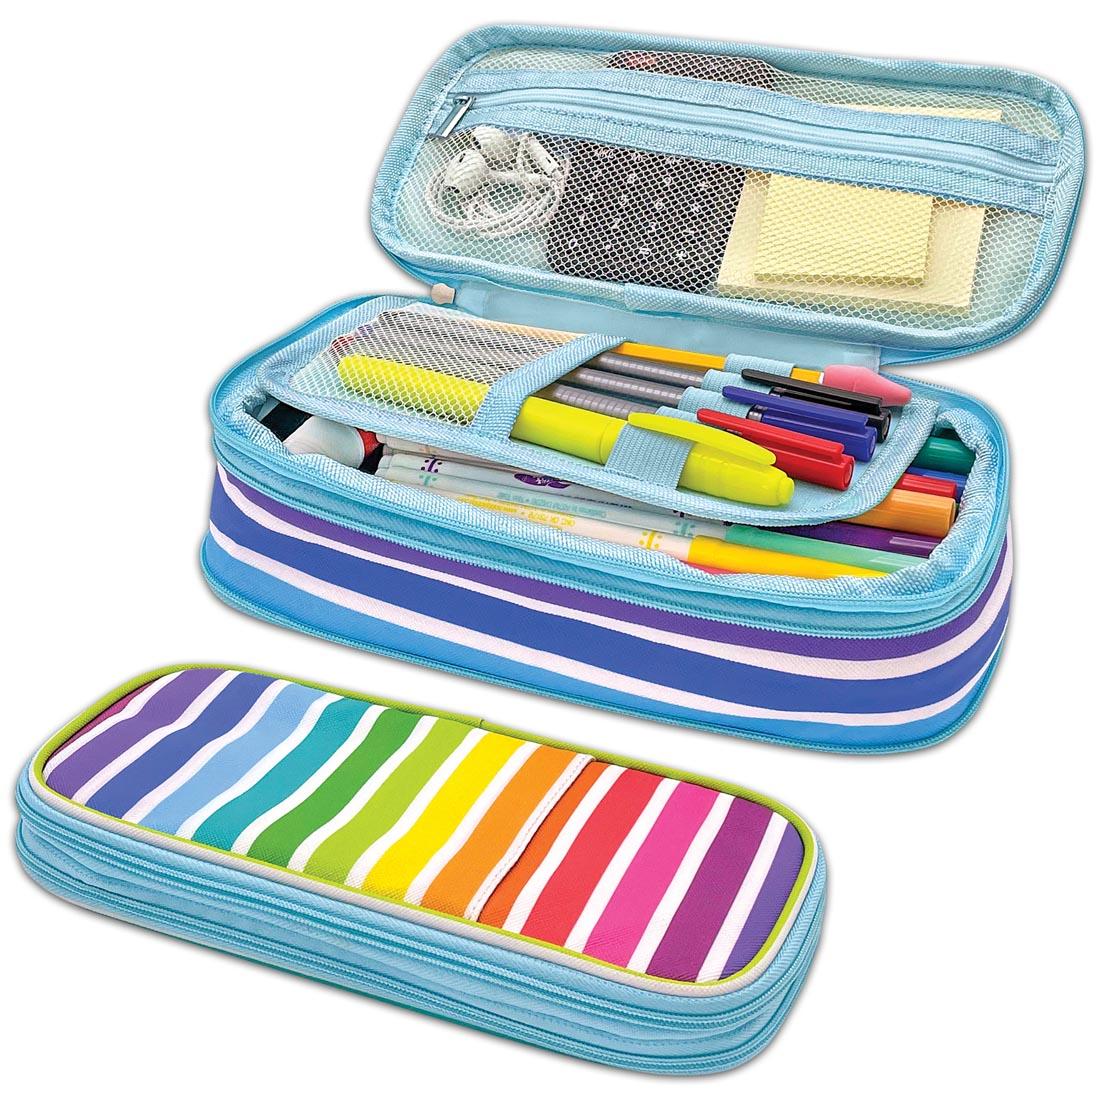 Colorful Stripes Pencil Case shown both closed and open with suggested contents inside